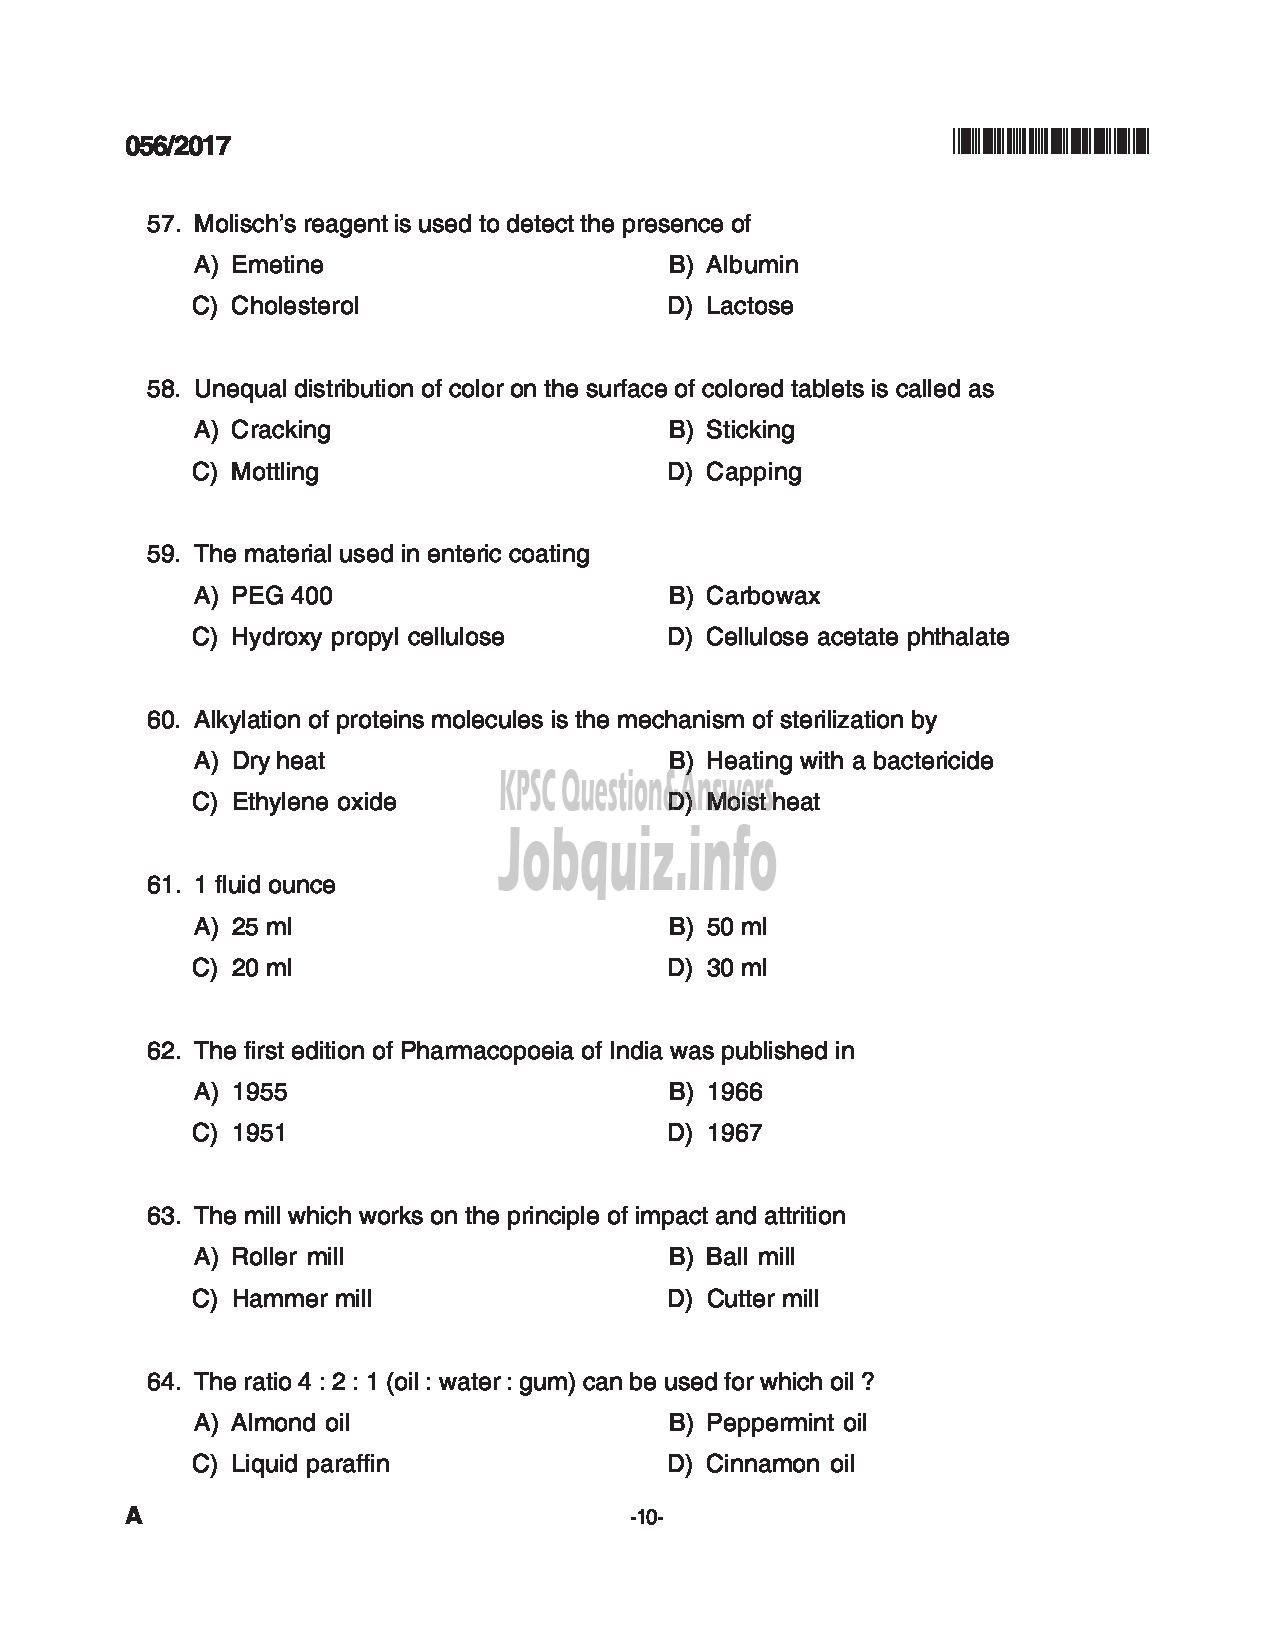 Kerala PSC Question Paper - PHARMACIST GRADE II INSURANCE MEDICAL SERVICES QUESTION PAPER-10